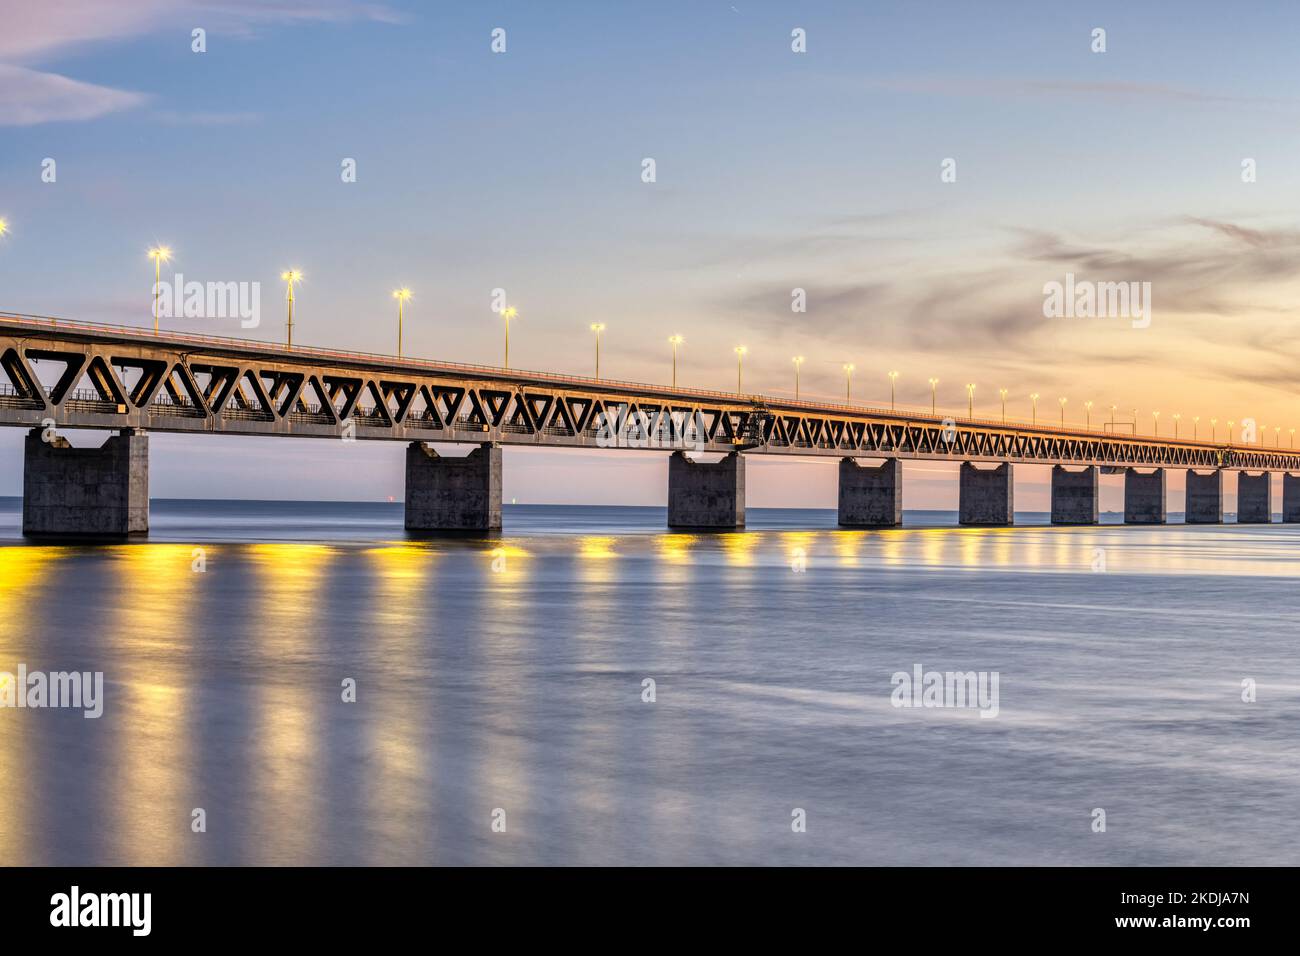 Part of the famous Oresund bridge between Denmark and Sweden after sunset Stock Photo